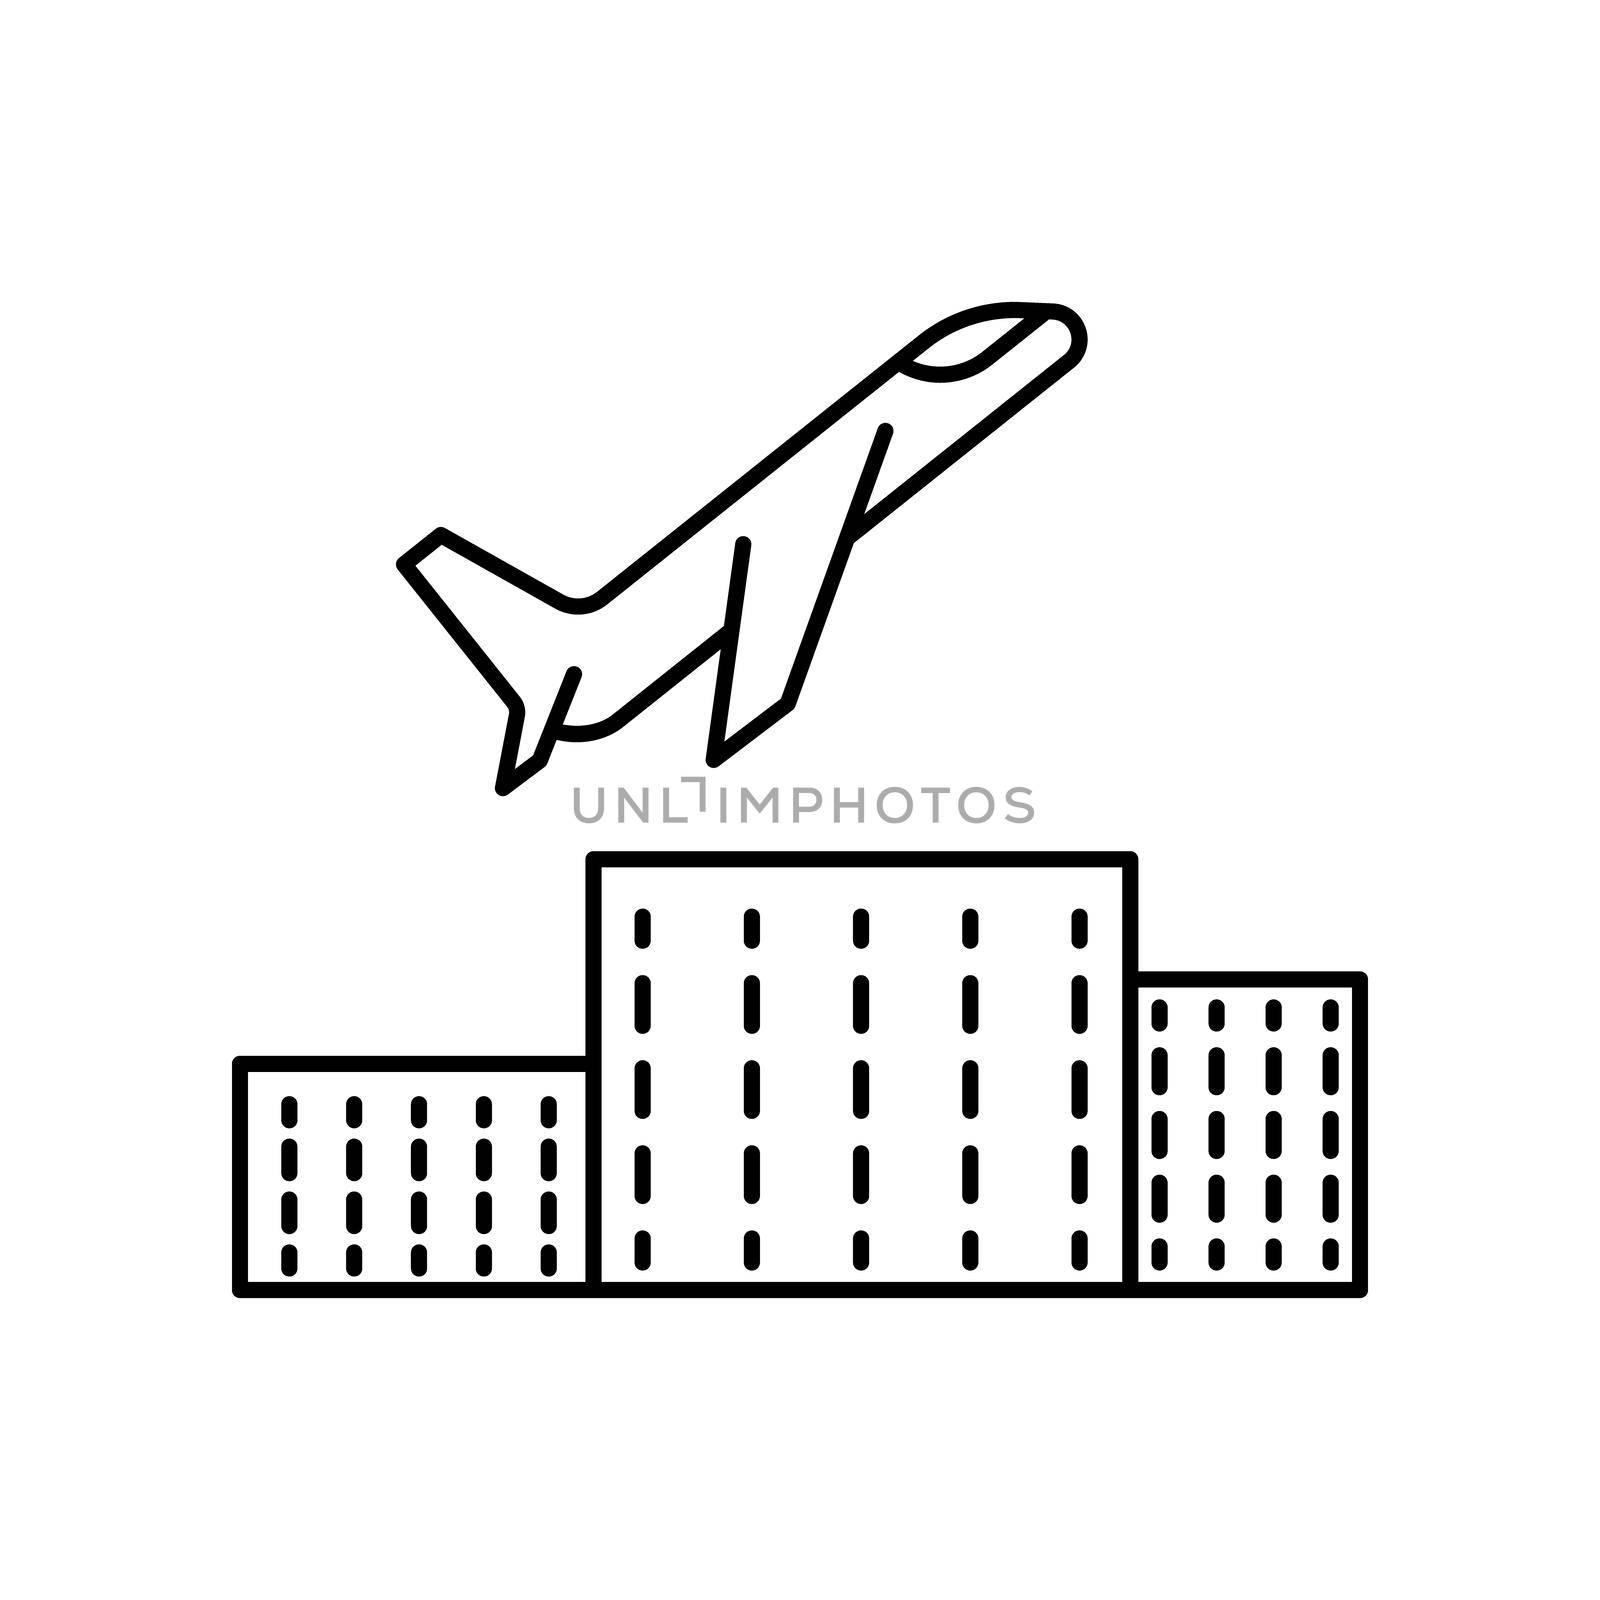 take off, roll o plane, transportation line icon. elements of airport, travel illustration icons. signs, symbols can be used for web, logo, mobile app, UI, UX on white background